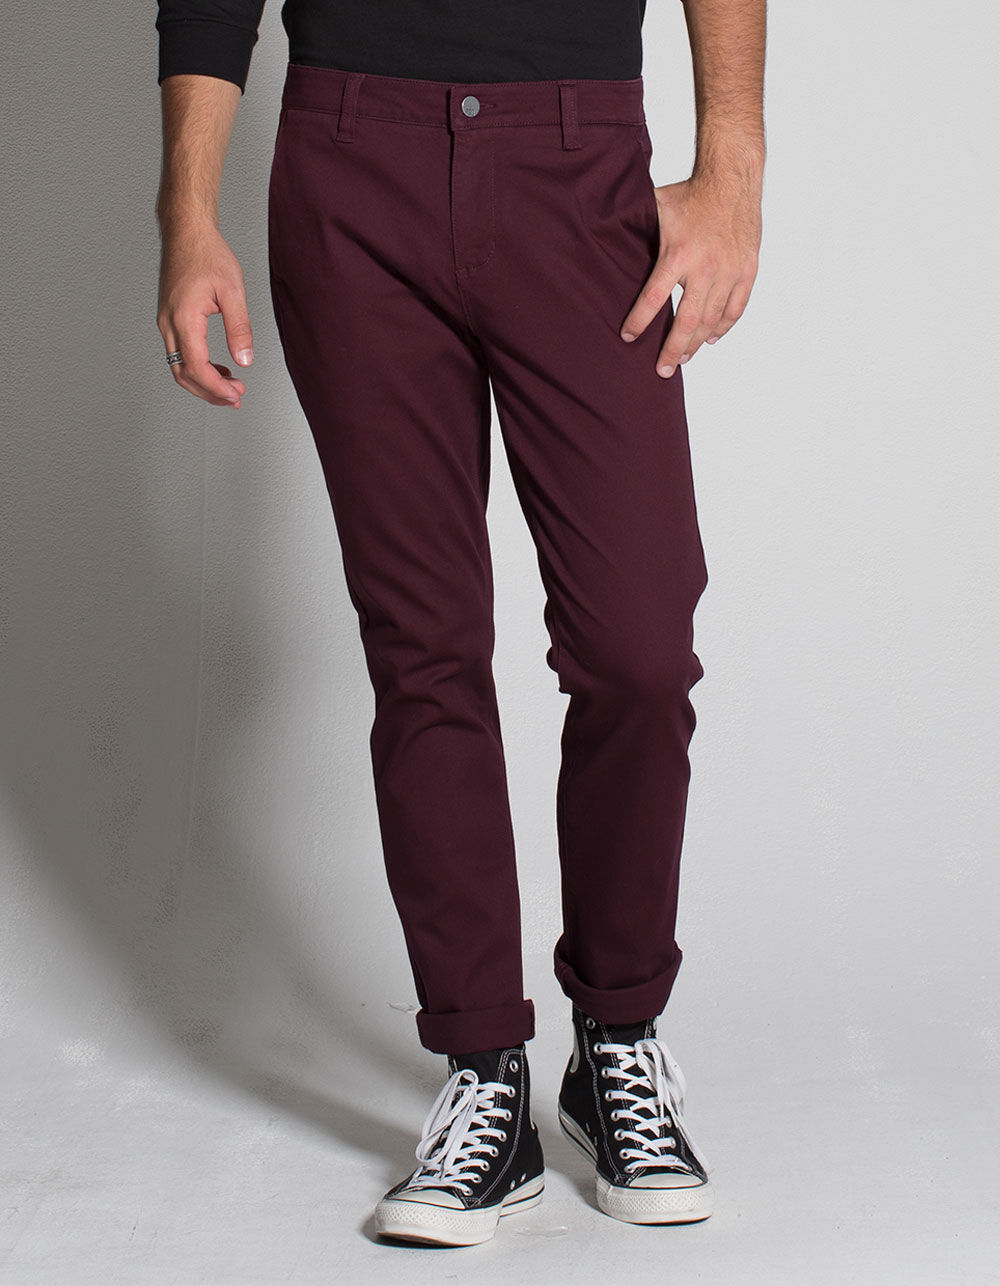 RSQ London Blackberry Mens Skinny Stretch Chino Pants image number 0